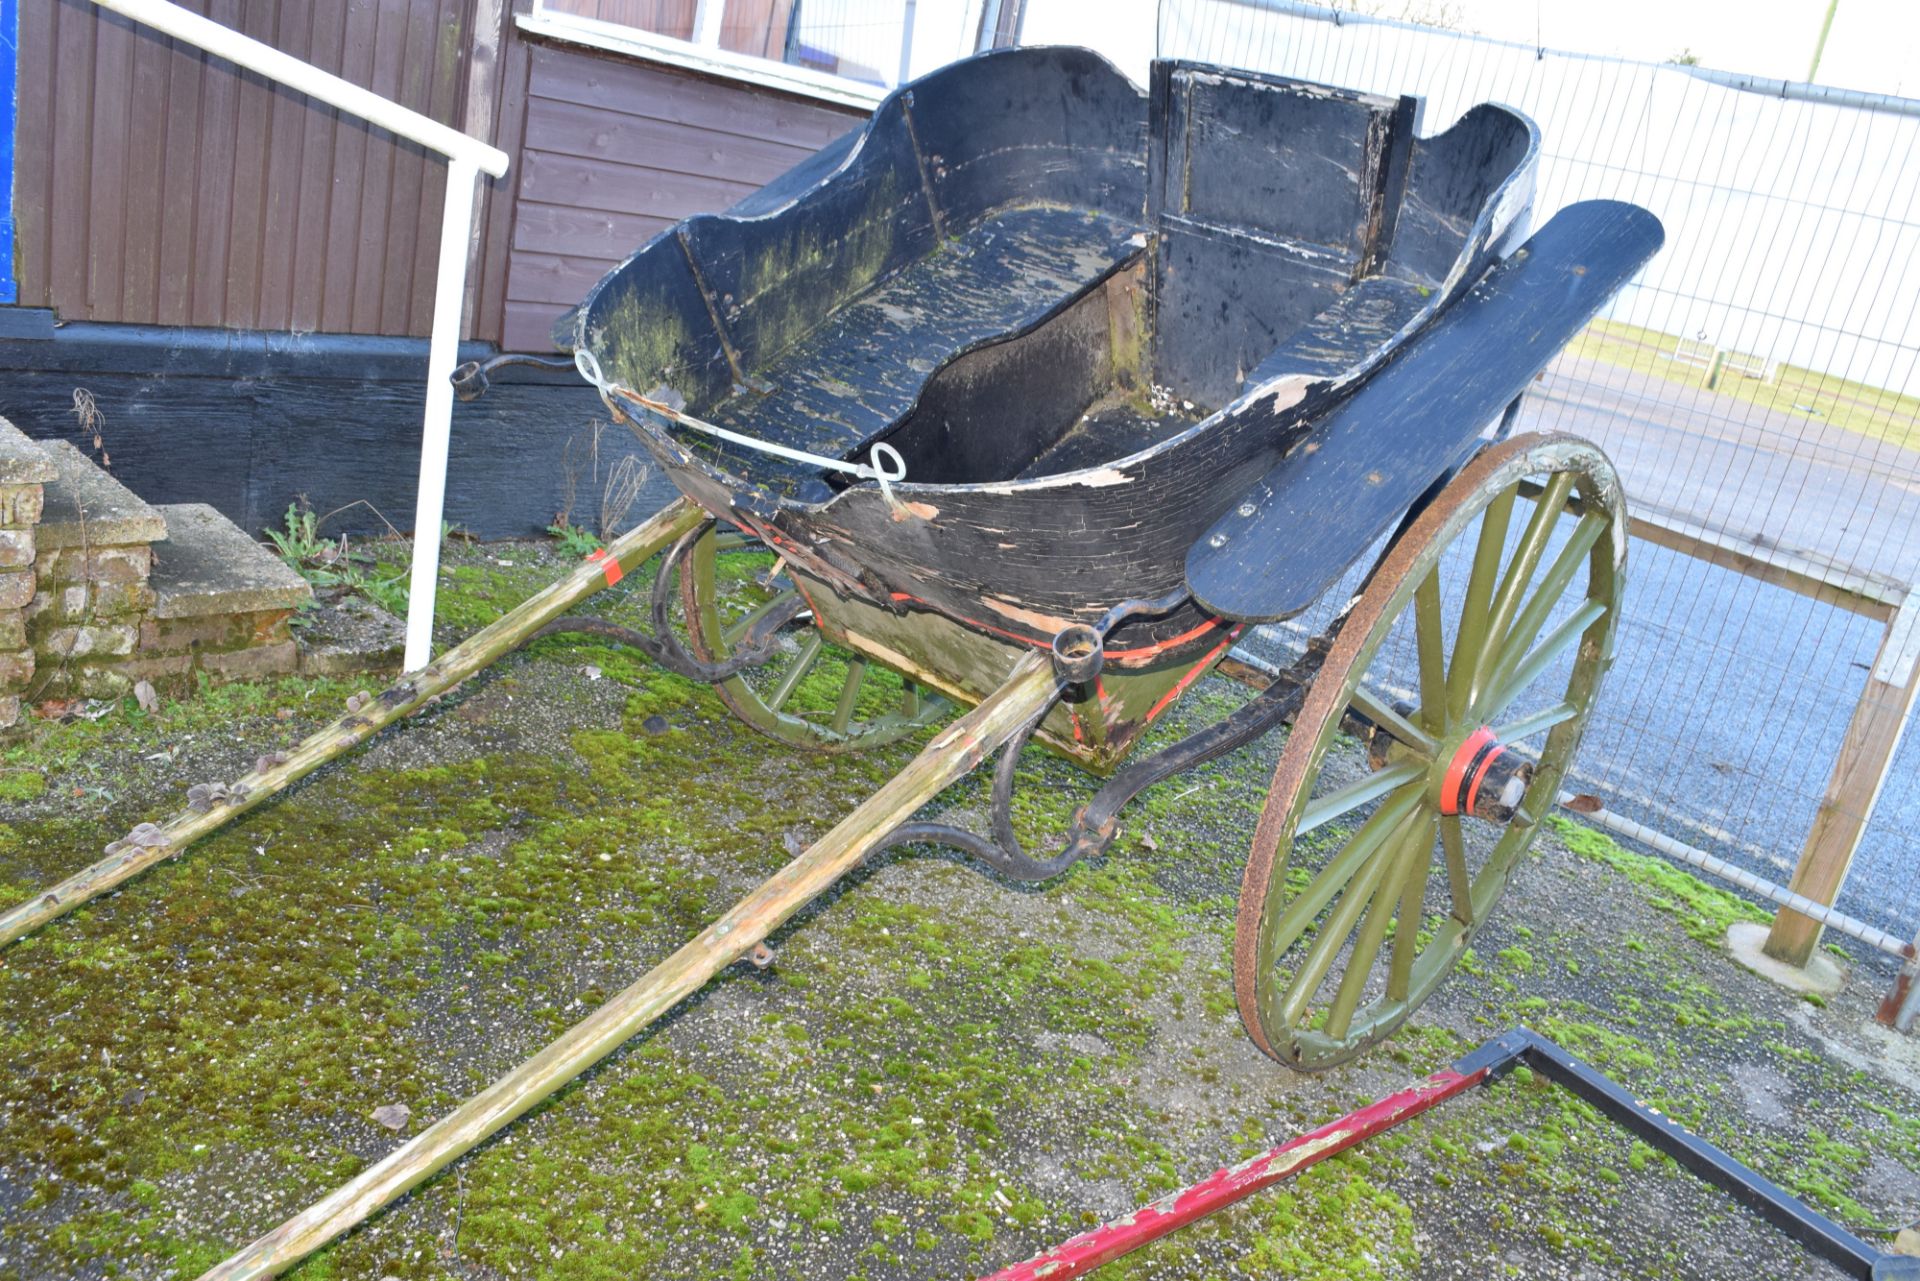 Horse-drawn cart, width approx 170cm, total length approx 320cm